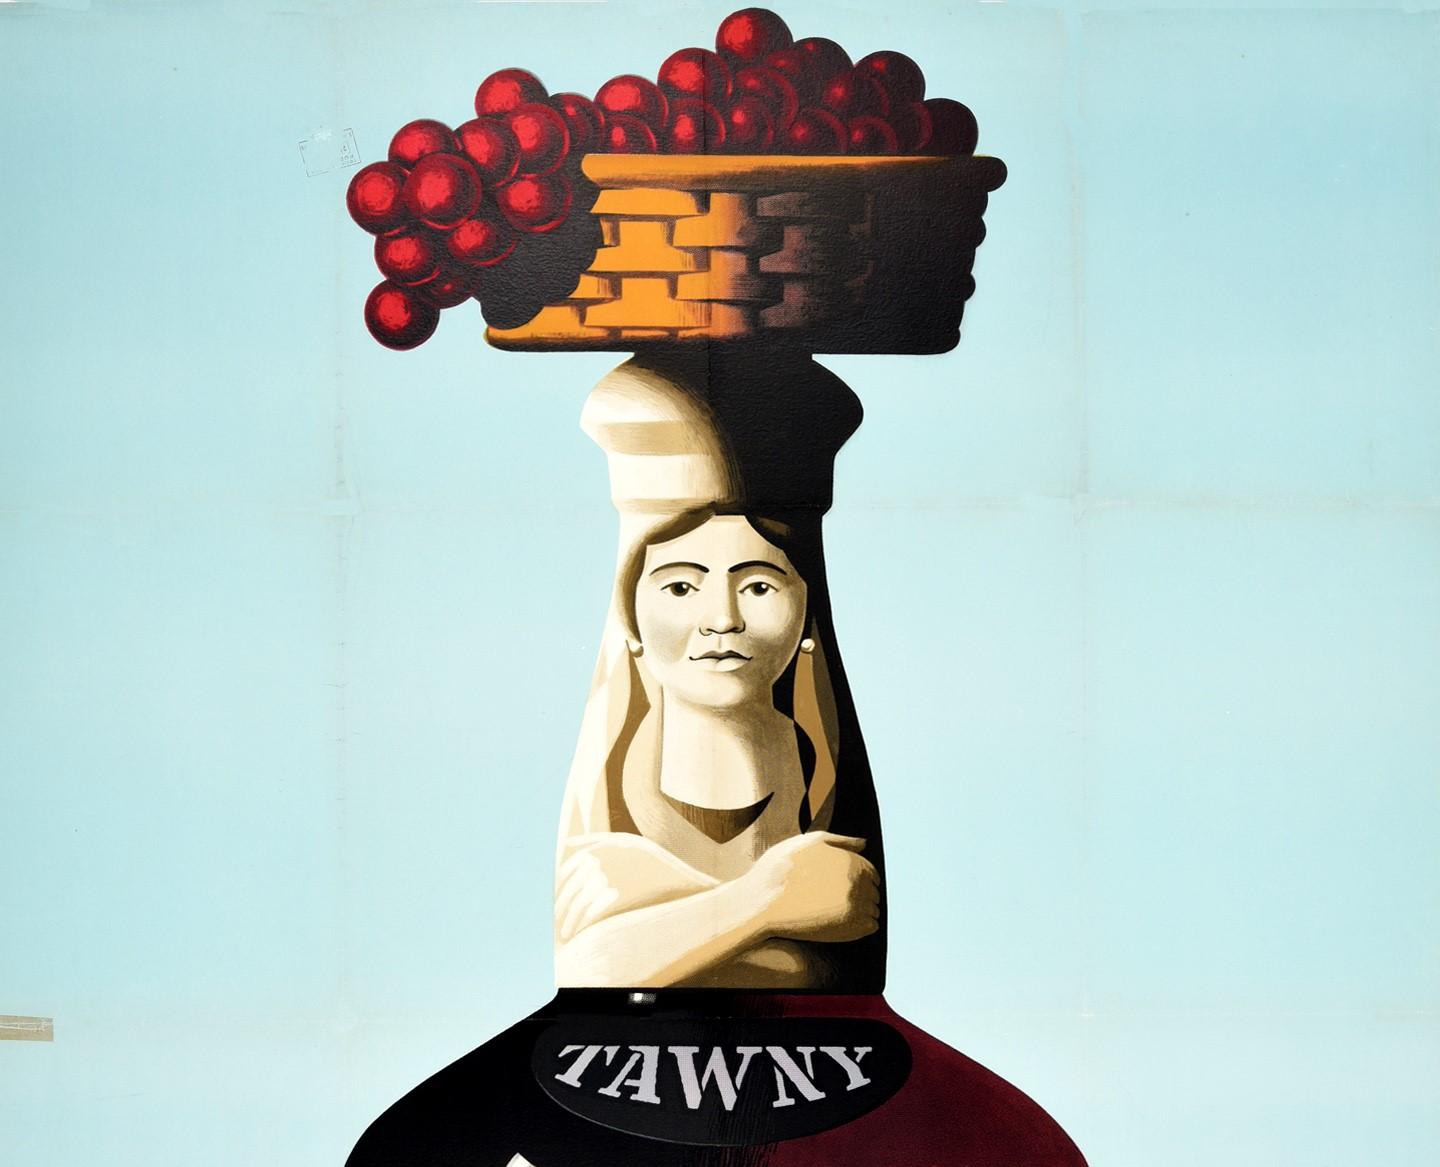 Original vintage alcohol drink advertising poster for Rozes Port featuring an image of a lady carrying a basket of red grapes on her head at the top of a bottle of port wine against a pale blue background, the label reading: Tawny Rozes Port Produce